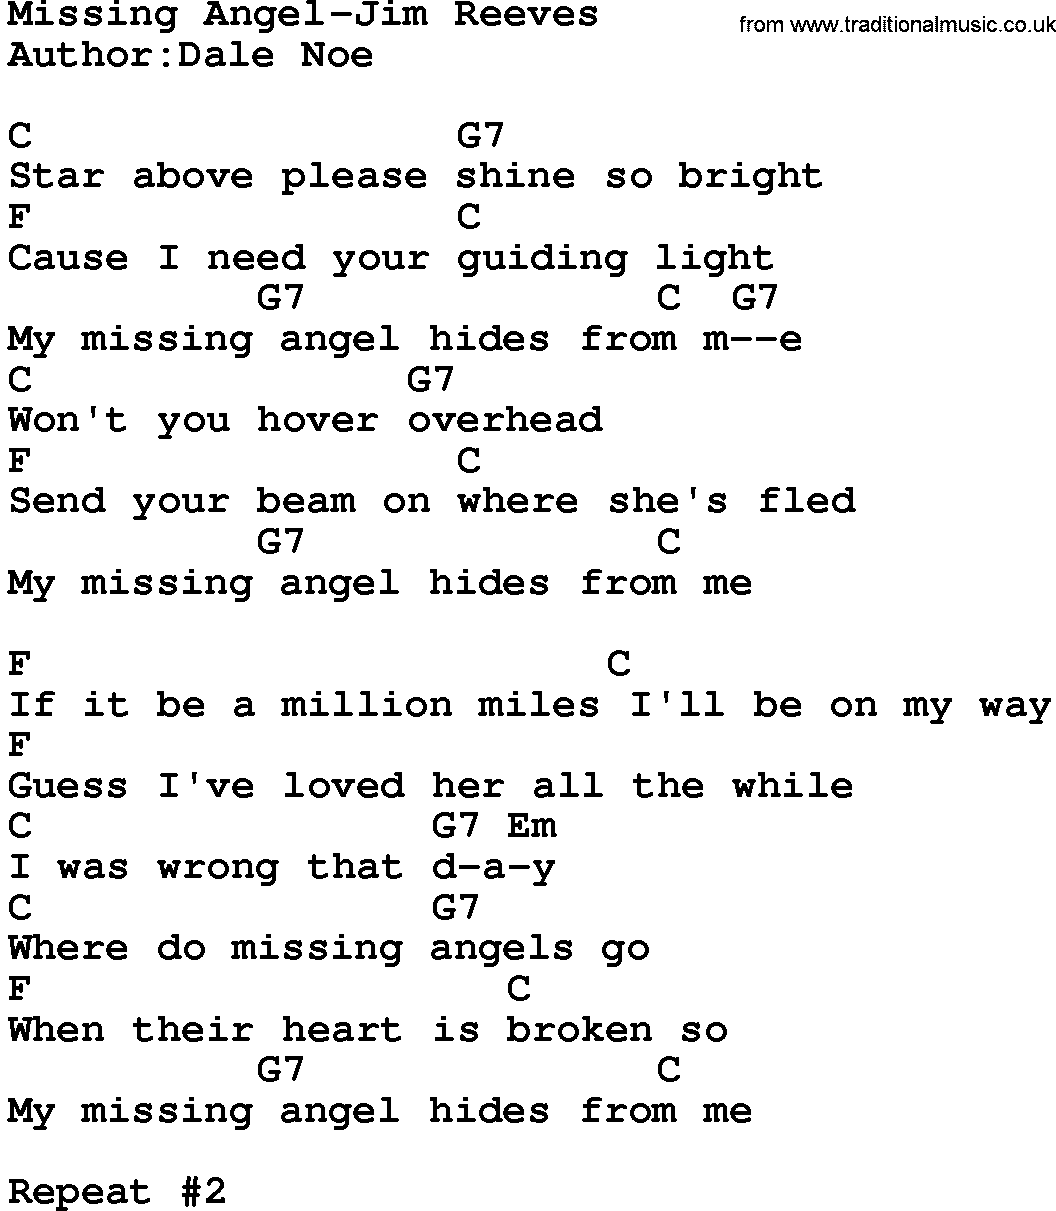 Country music song: Missing Angel-Jim Reeves lyrics and chords